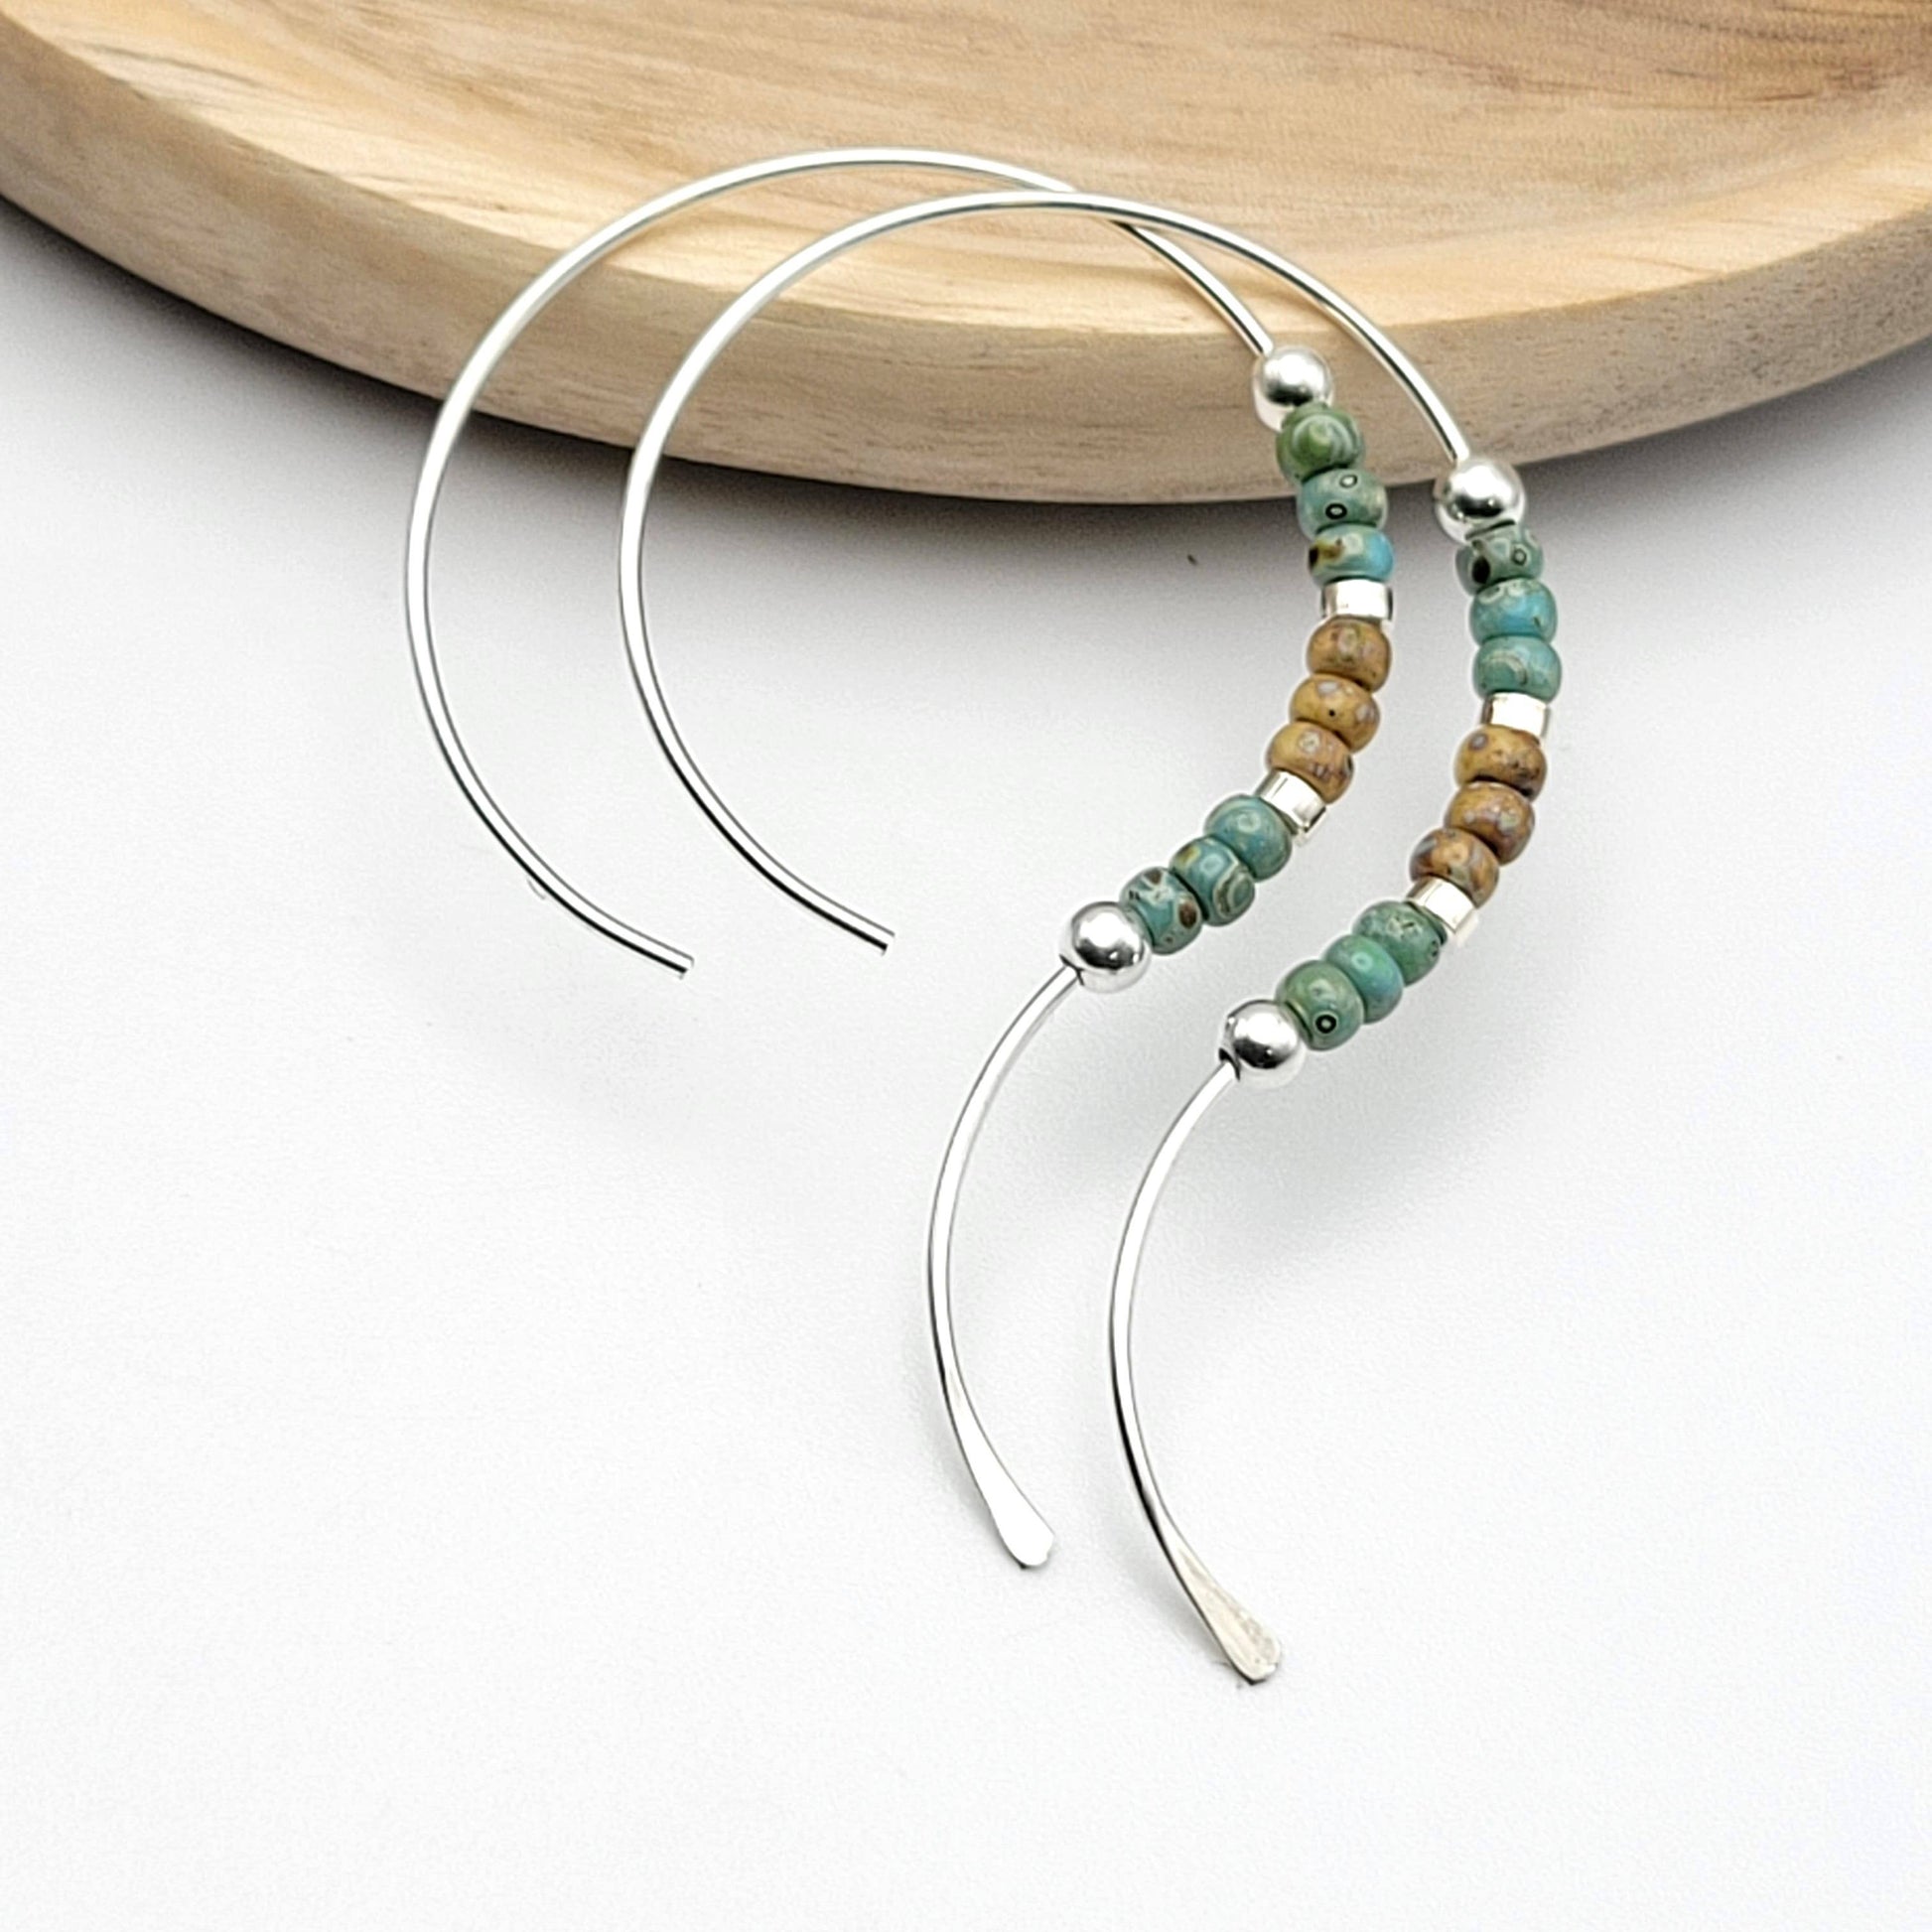 Silver Open Hoop Earrings with Turquoise and Tan Beads